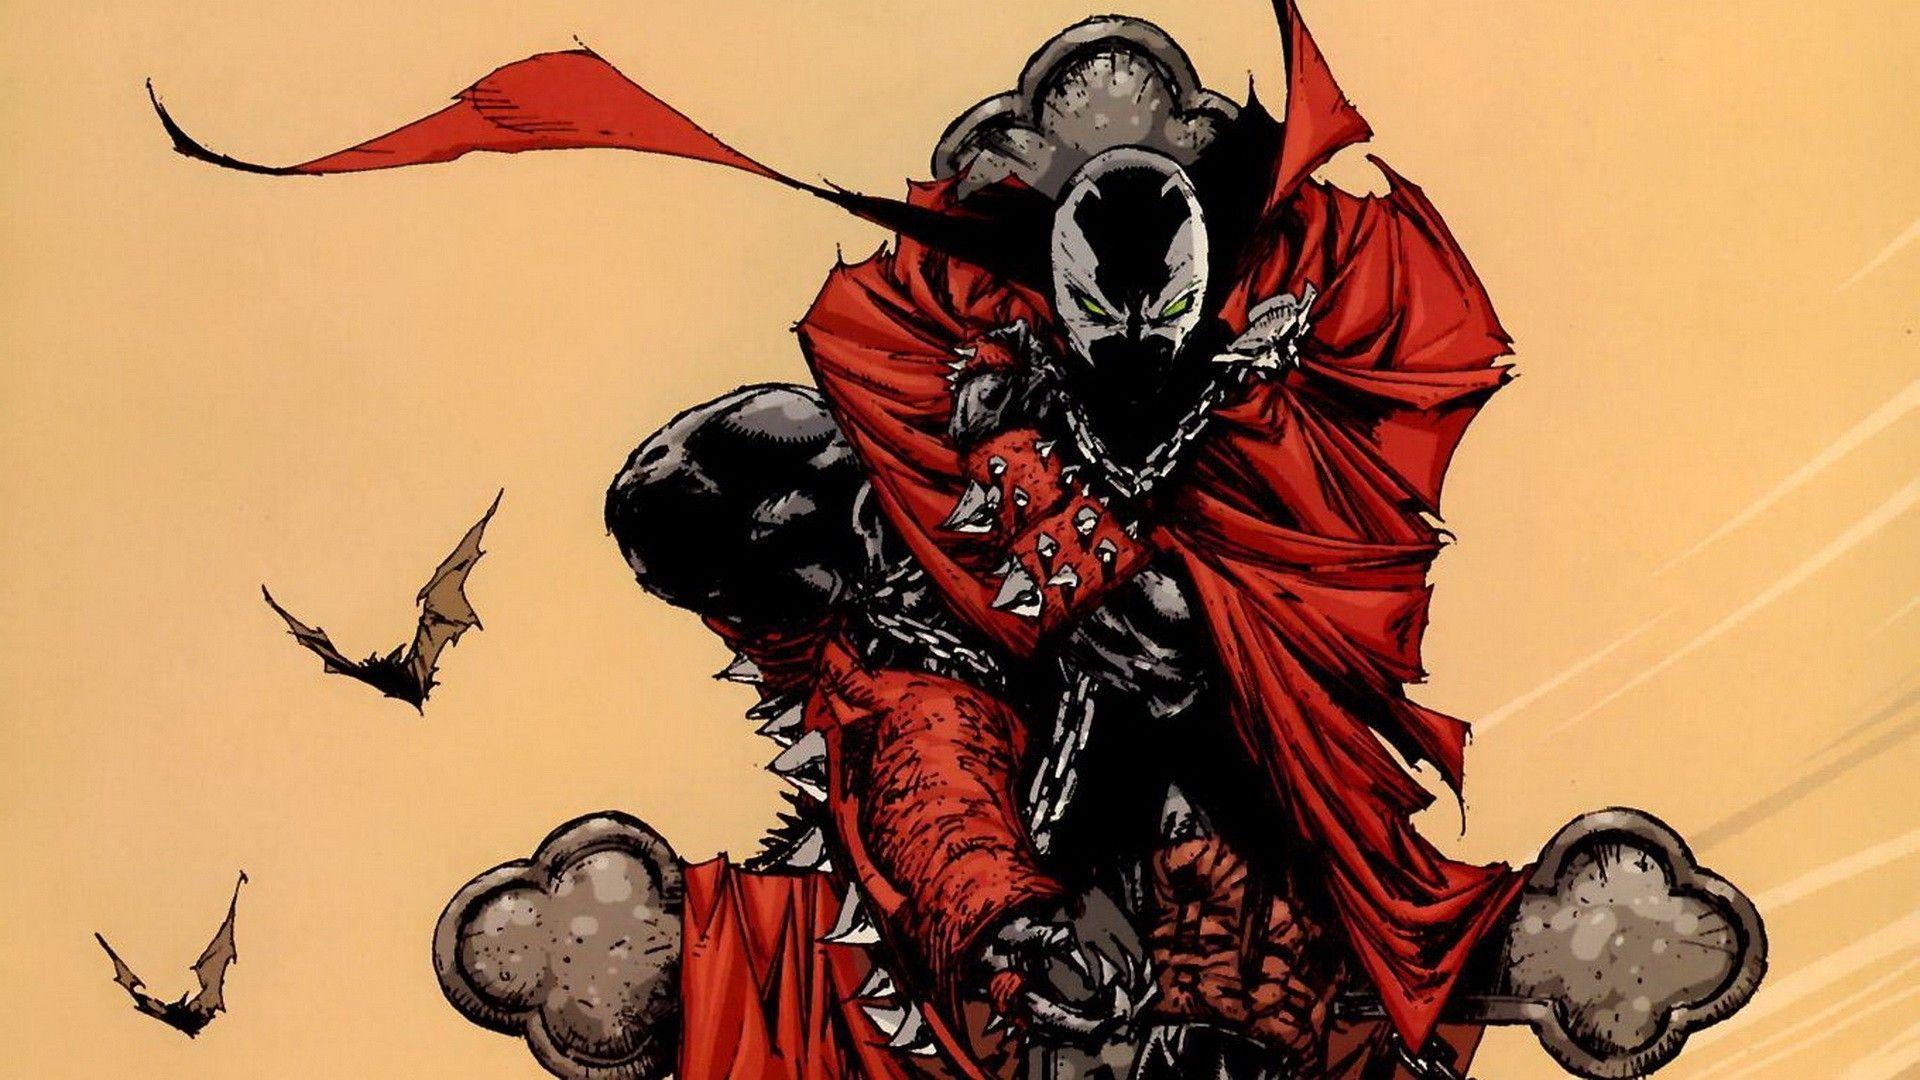 Rumours of Upcoming Spawn Film Come to Light